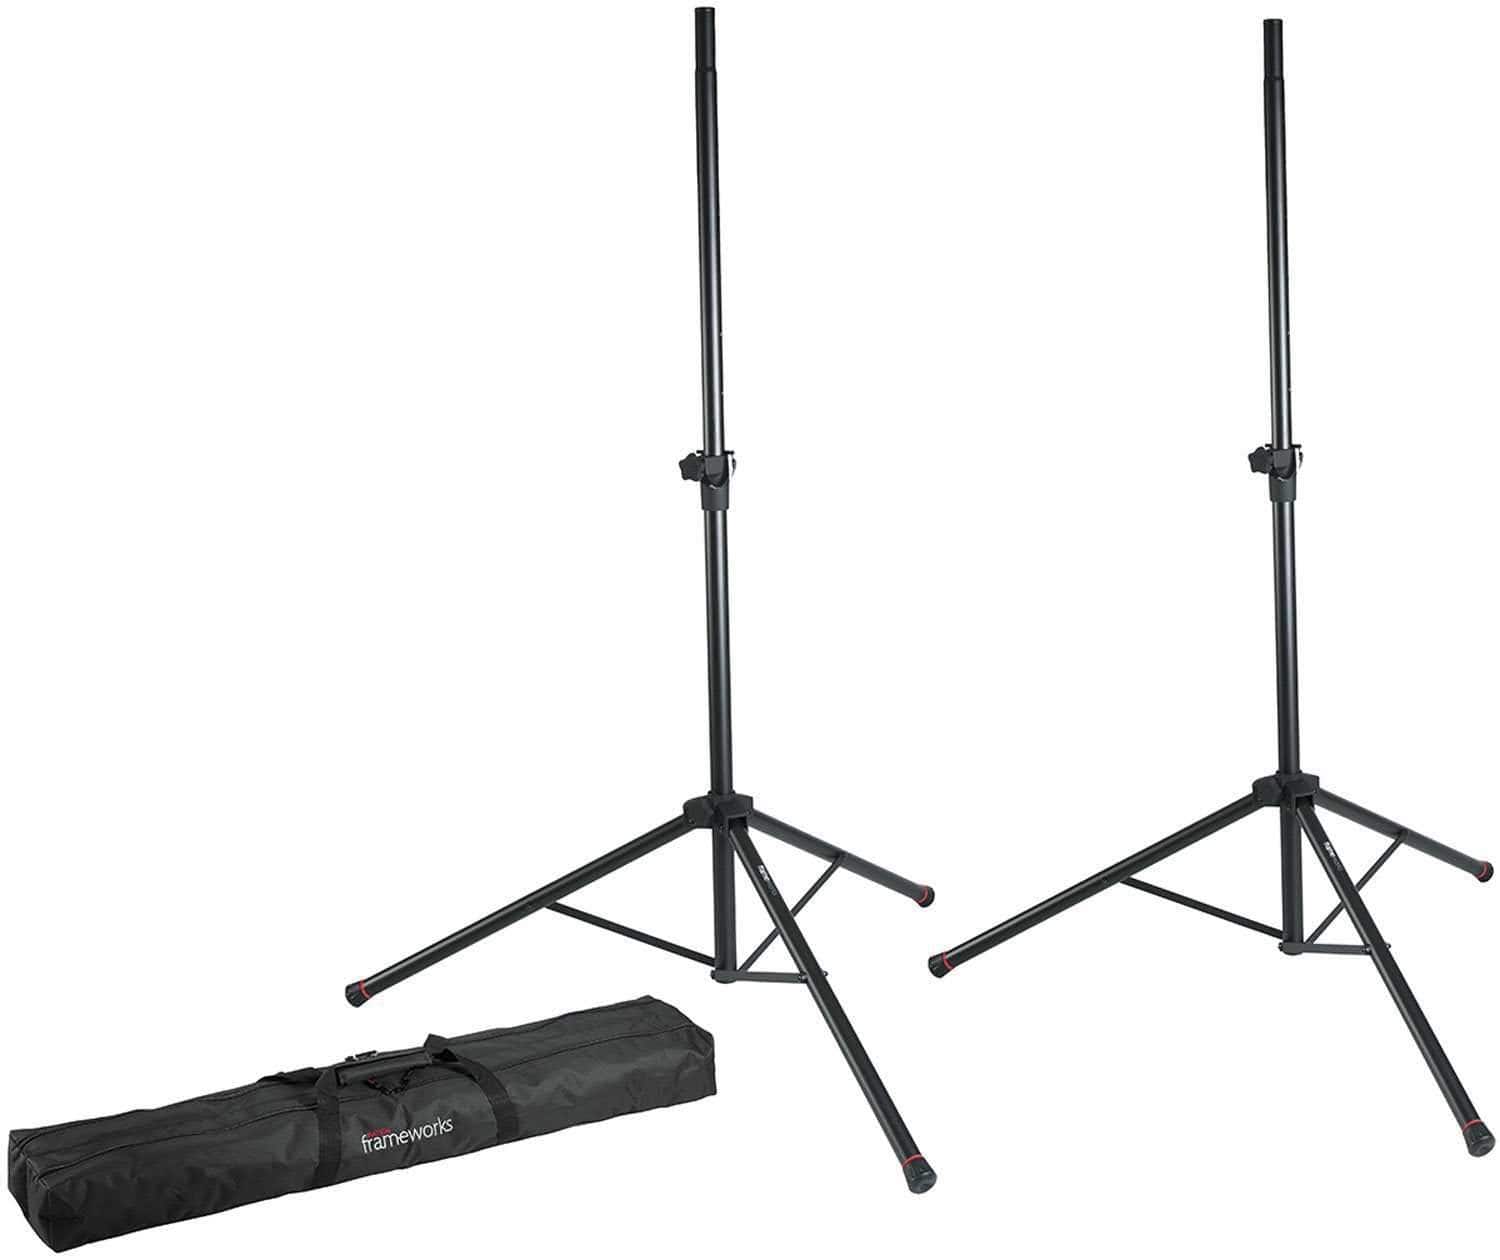 PreSonus AIR12 Powered Speakers (2) with Gator Stands & Totes - PSSL ProSound and Stage Lighting